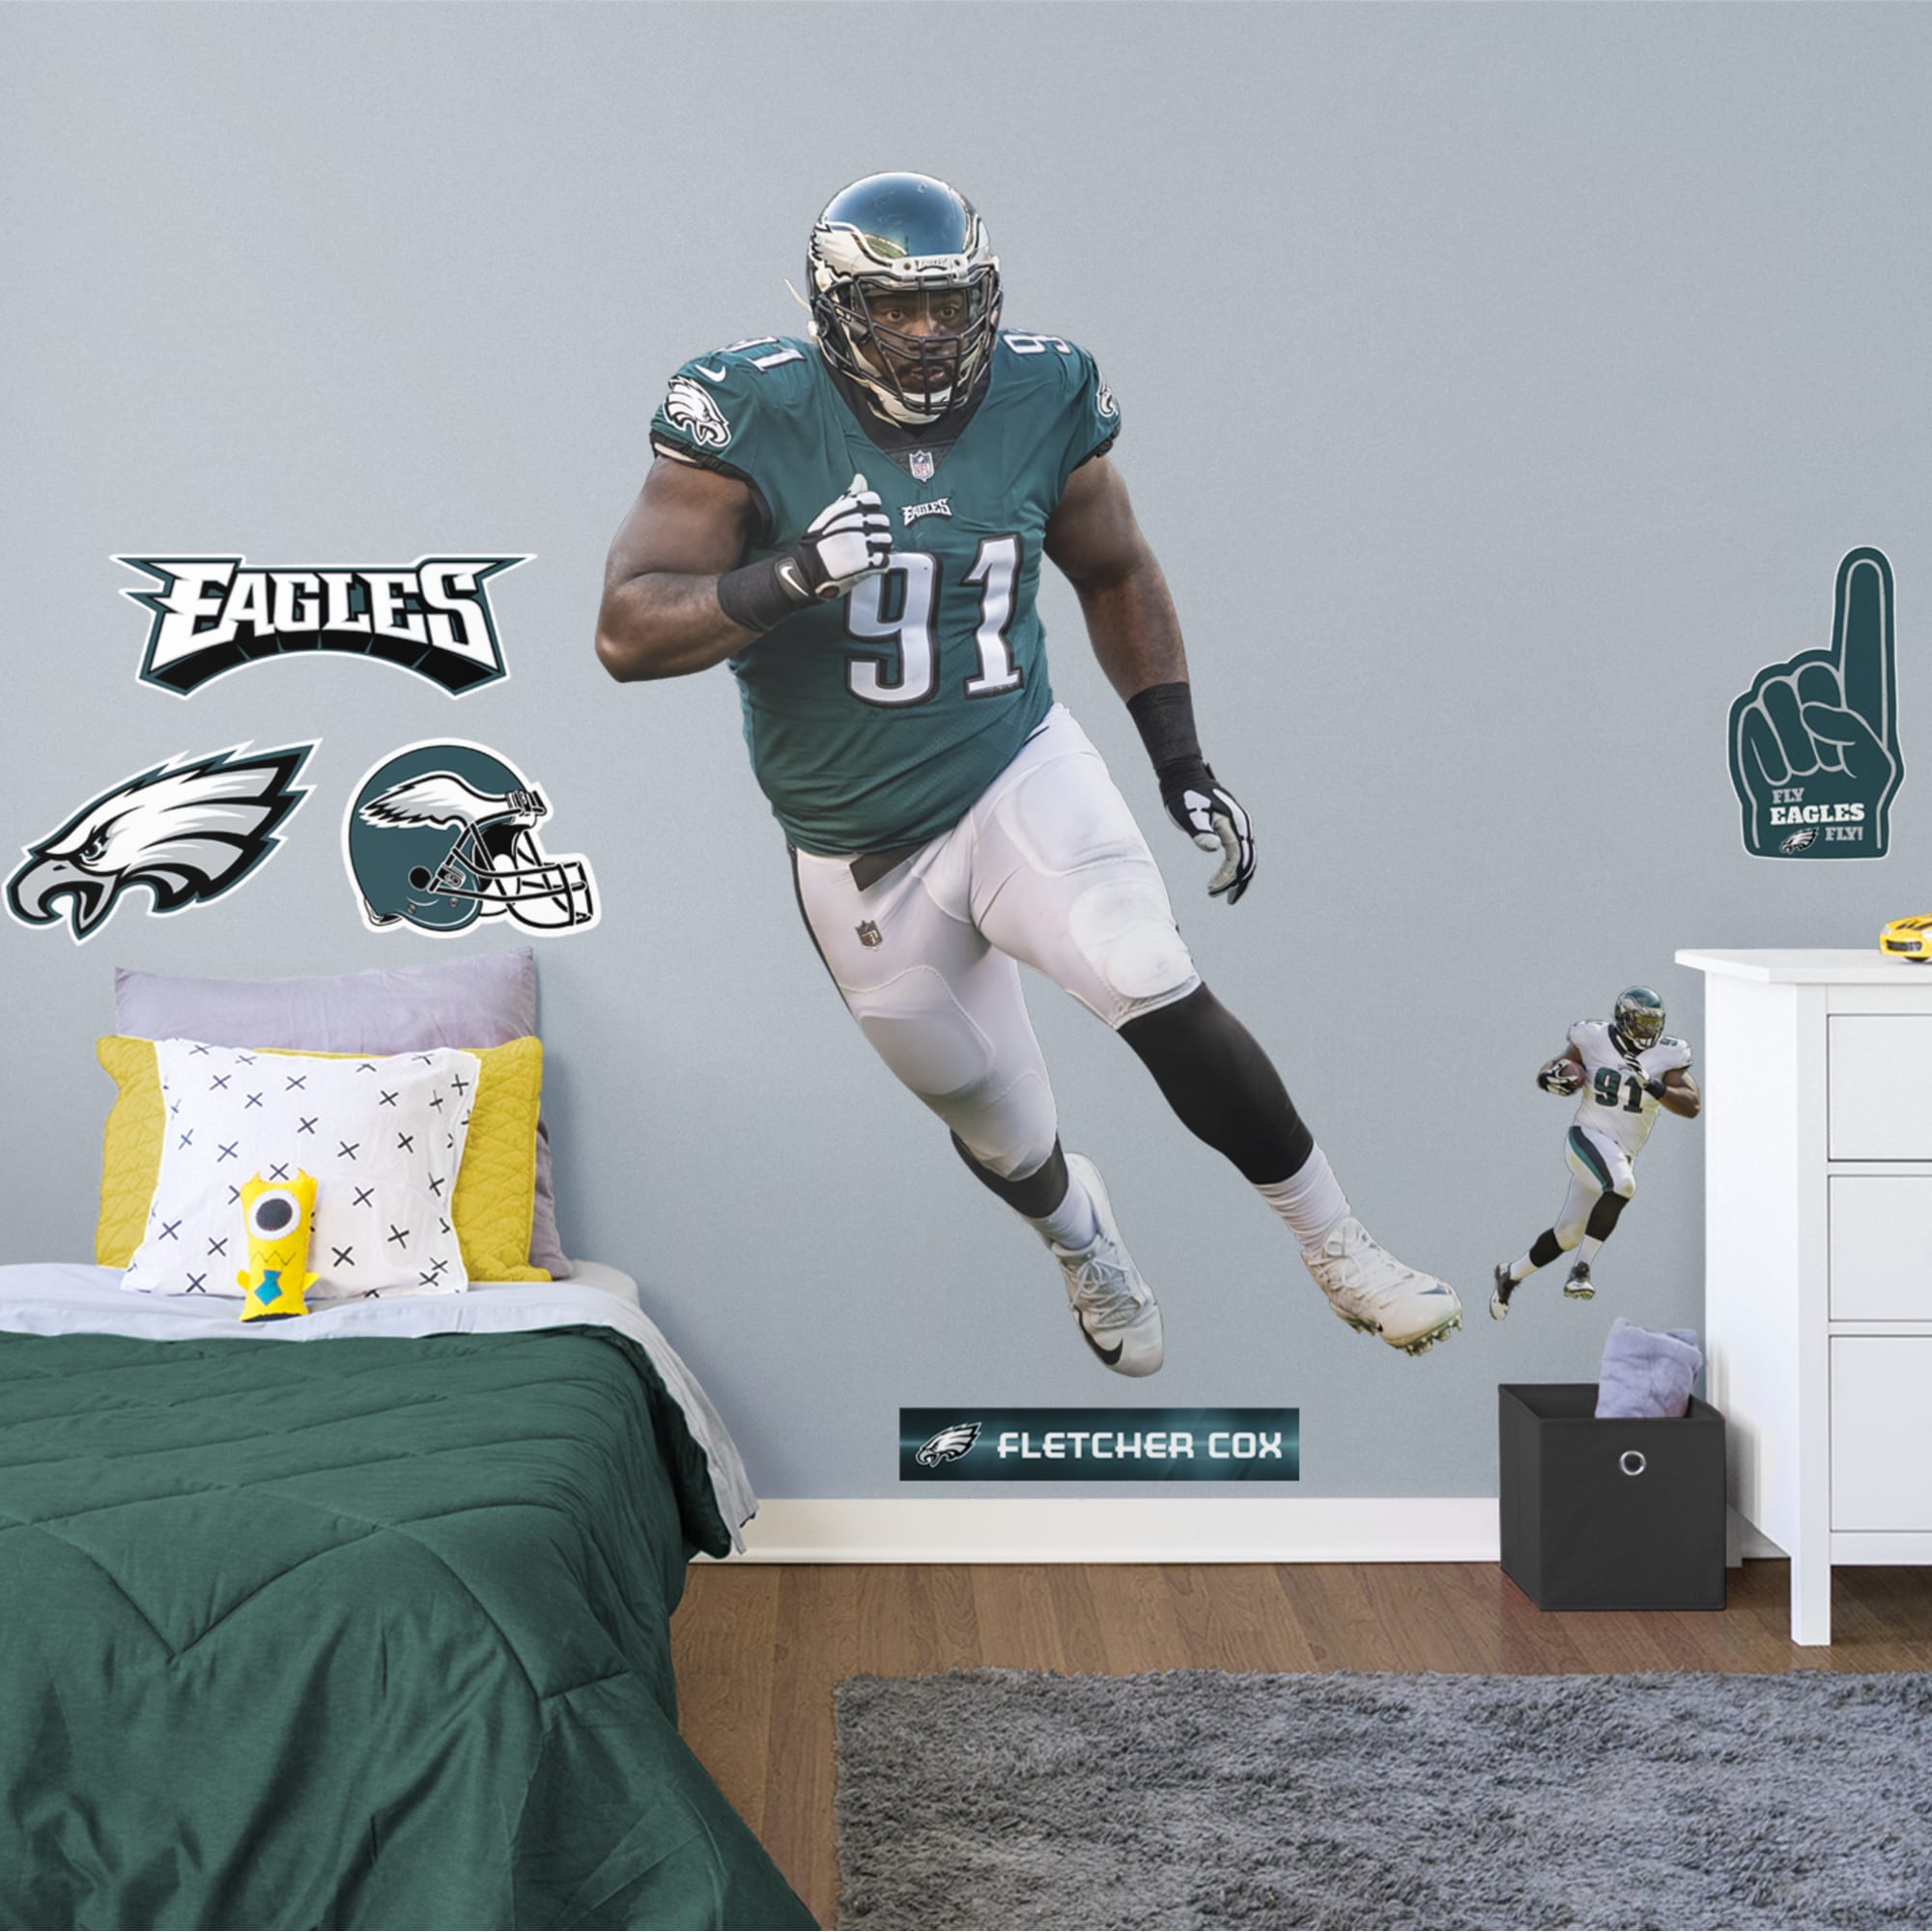 Fletcher Cox for Philadelphia Eagles - Officially Licensed NFL Removable Wall Decal Life-Size Athlete + 9 Decals (54"W x 74"H) b